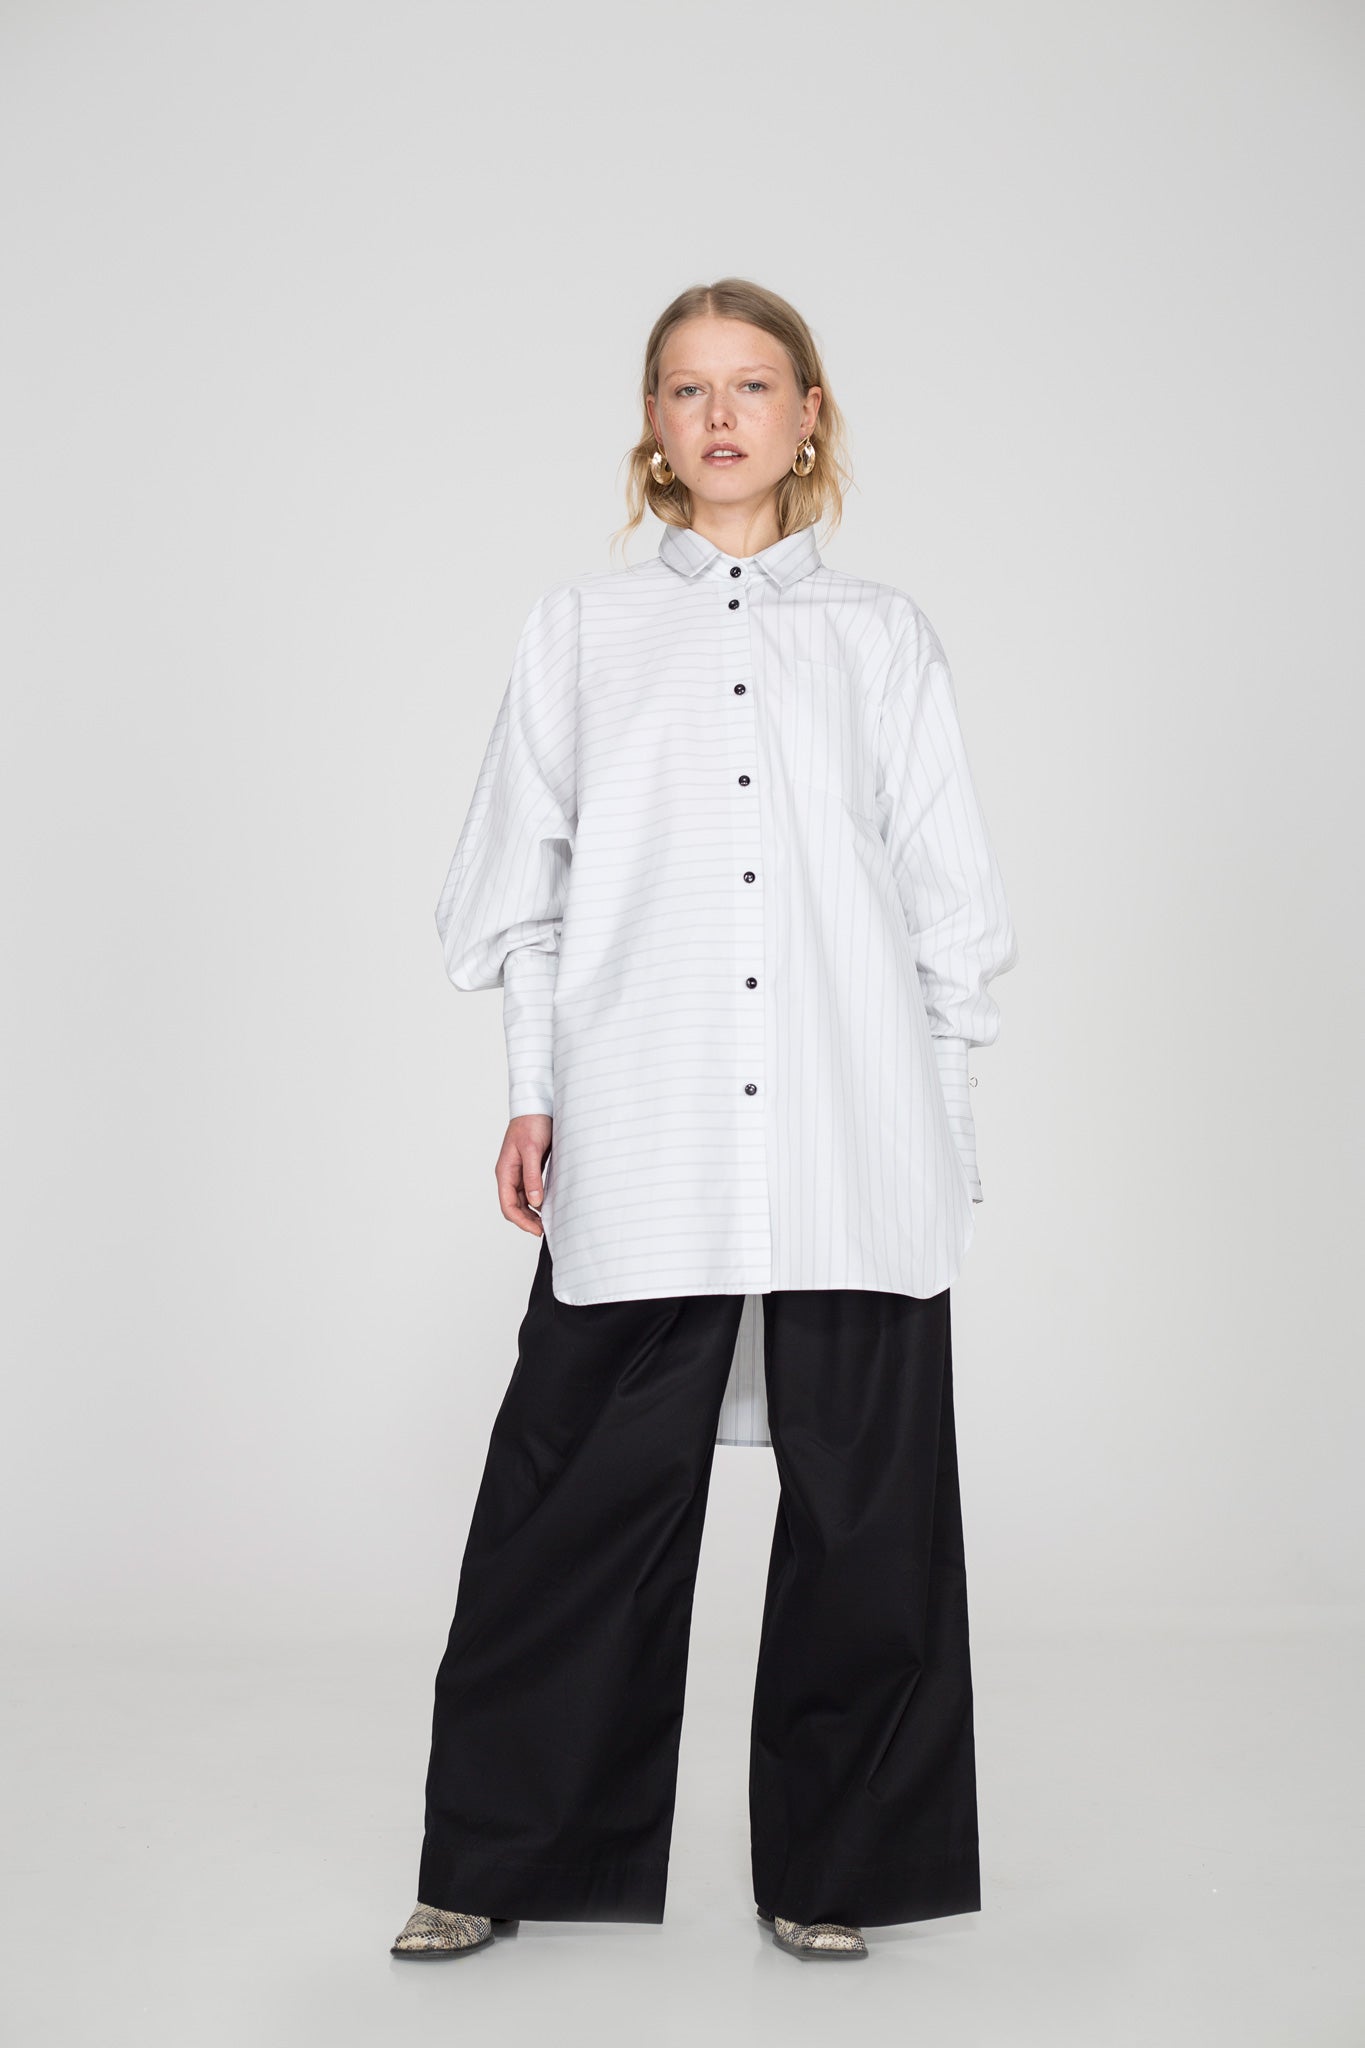 Oversized shirt with one wide sleeve